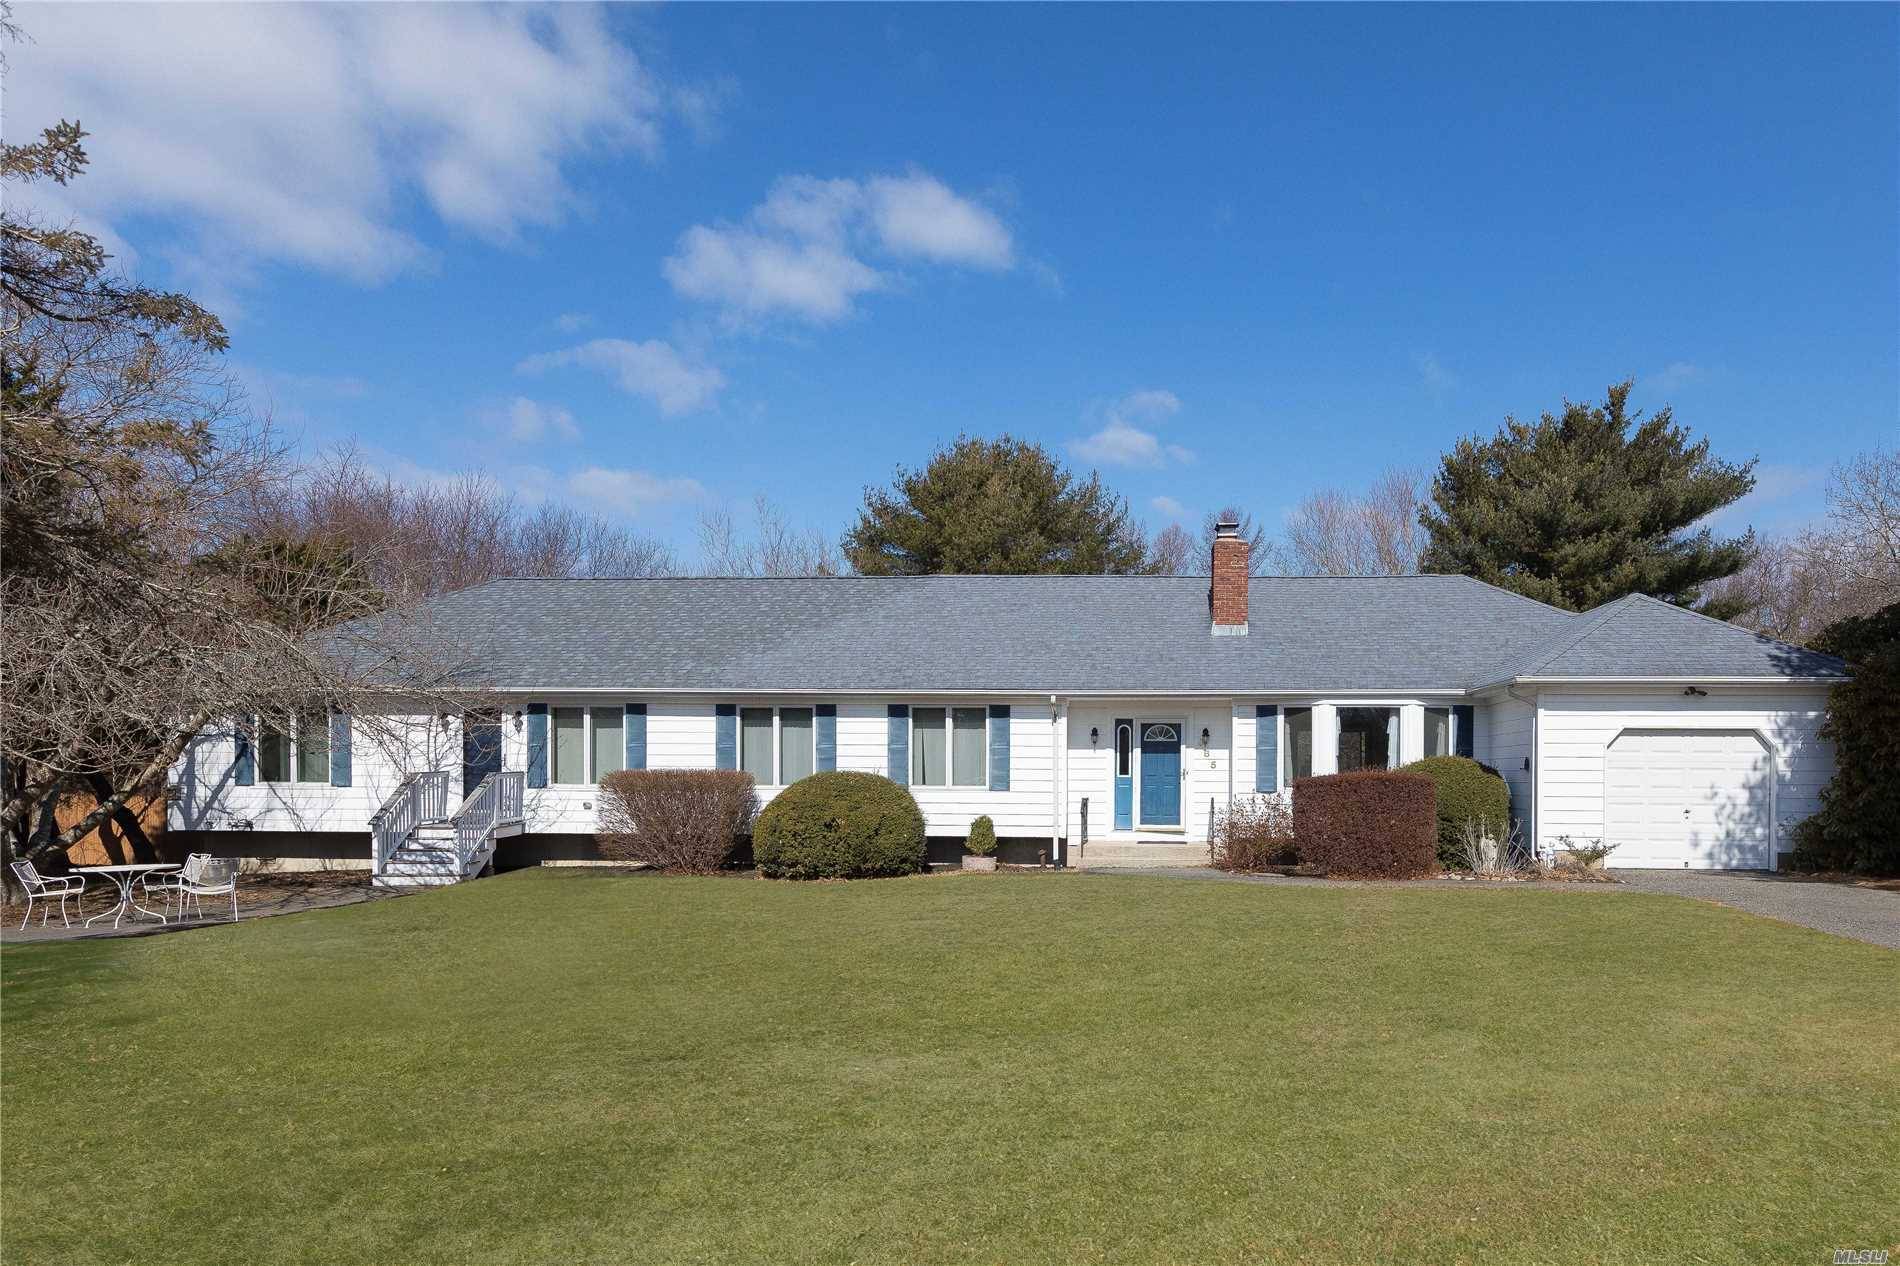 A sprawling 4 bedroom, 3 bath Ranch with many opportunities, situated on a shy acre just a short distance from the heart of Southold Village.